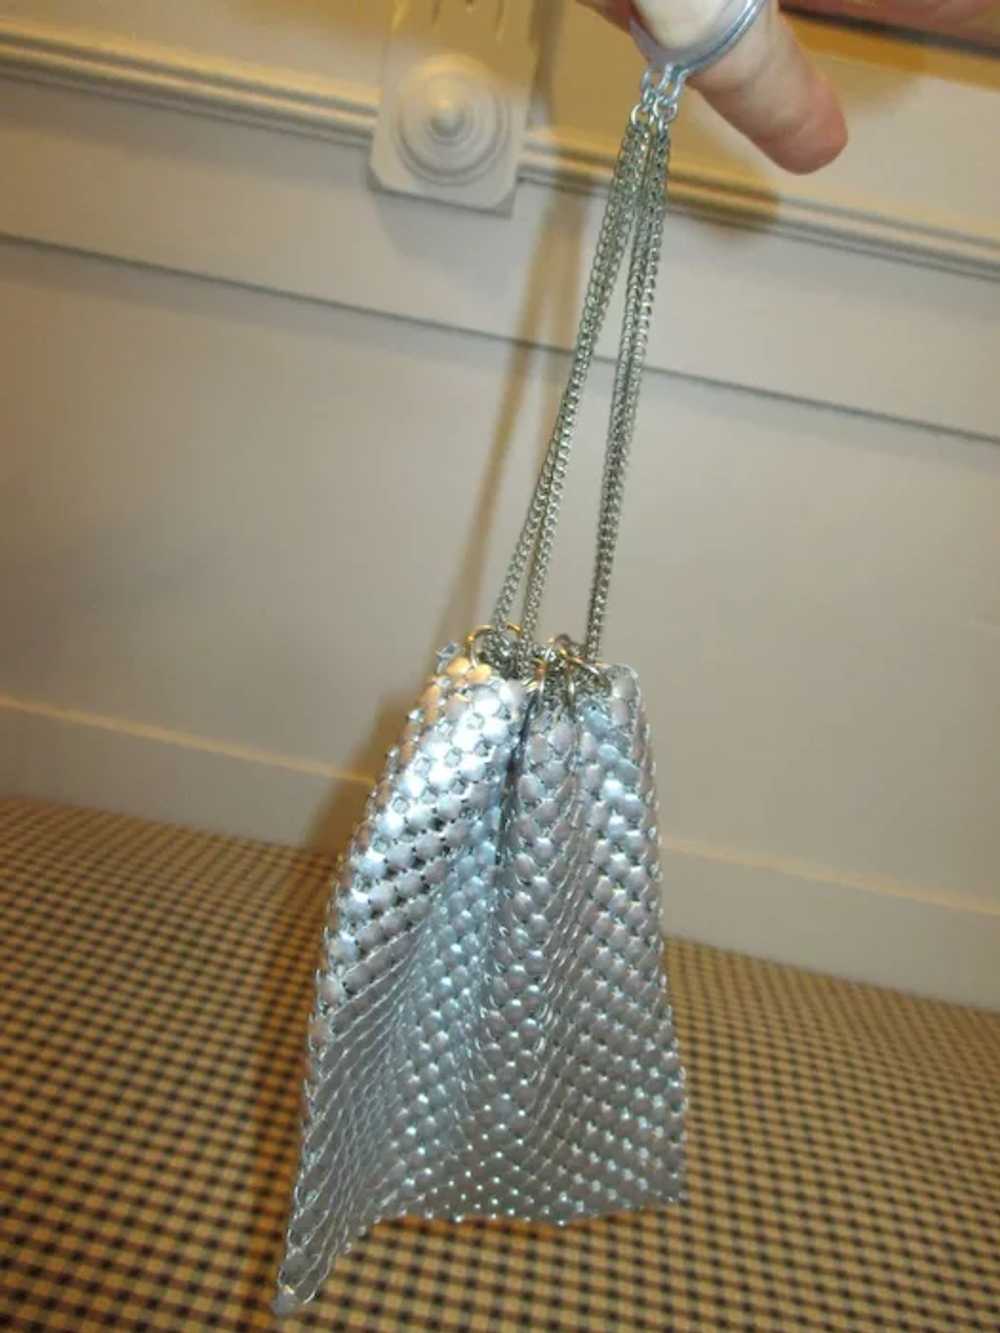 Vintage Chainmail Purse - Very Chic and Pretty - image 5